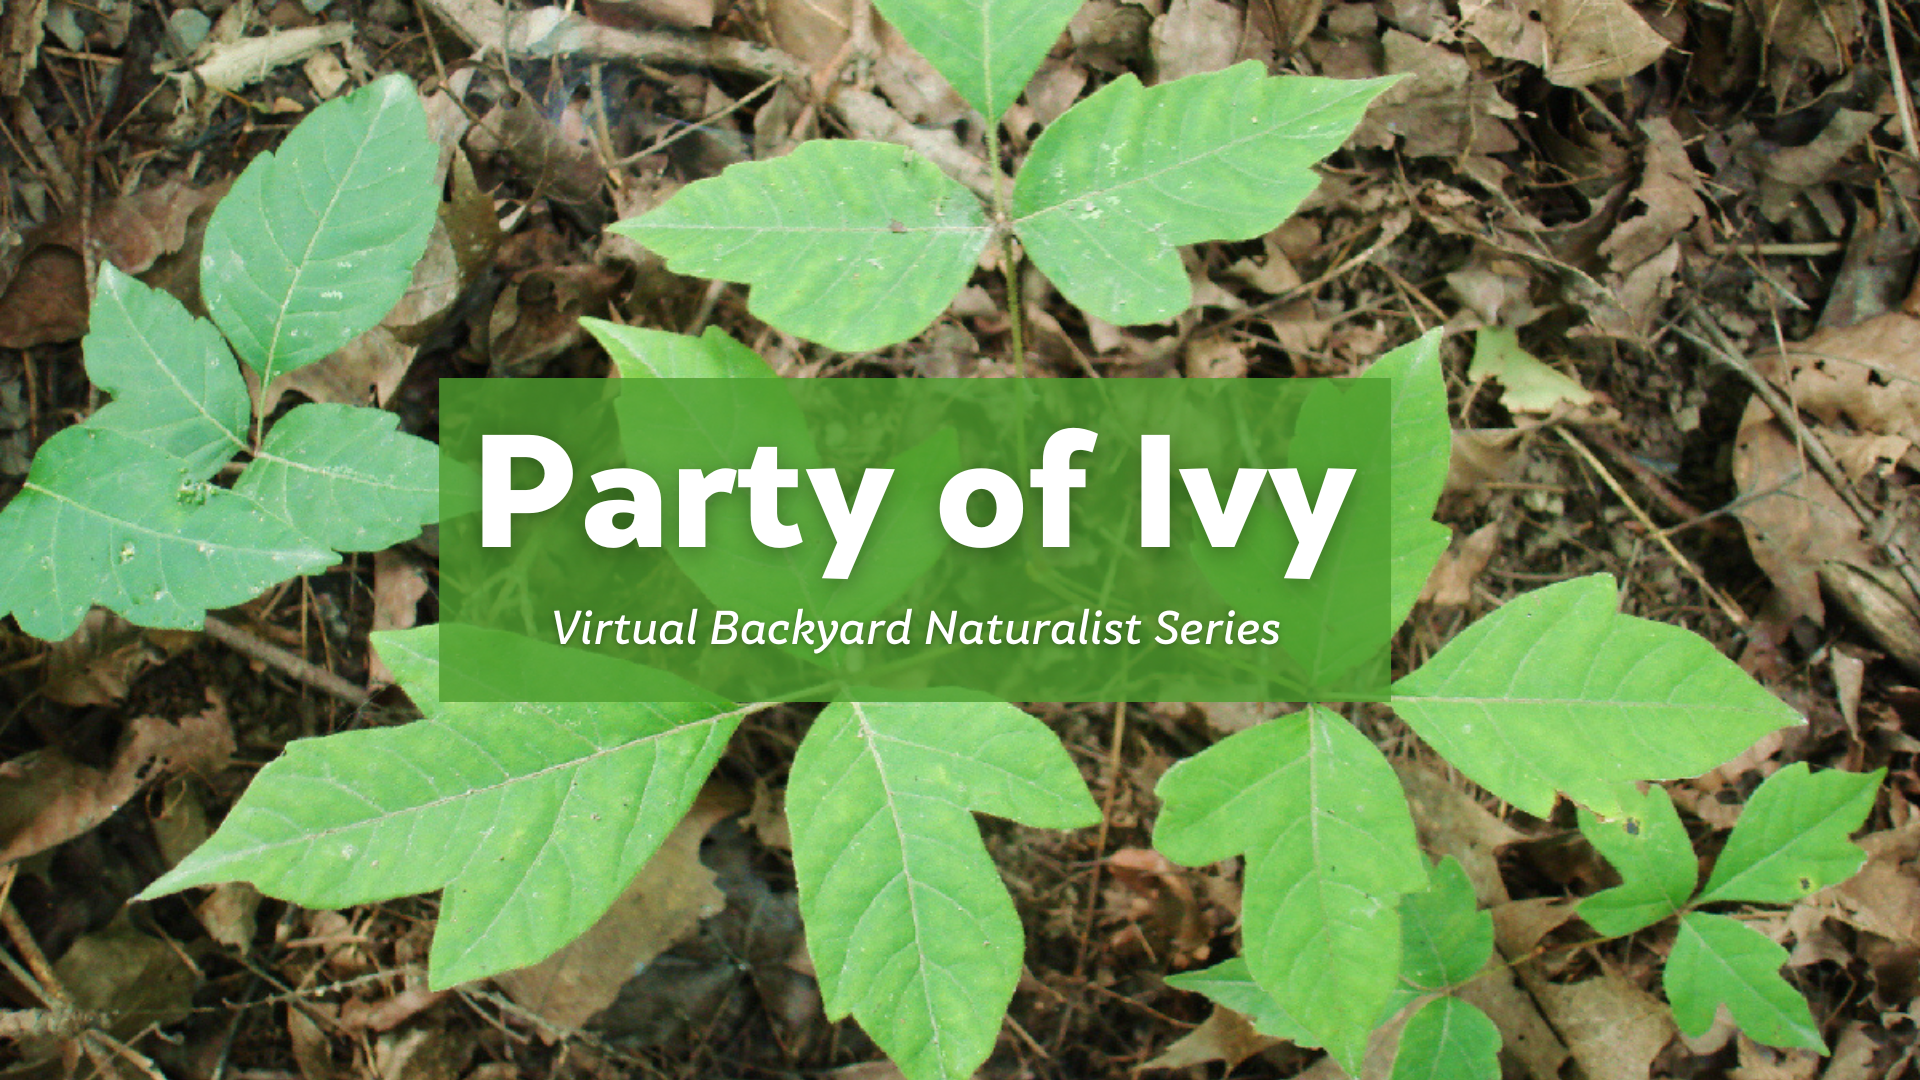 Party of Ivy - Backyard Naturalist Lecture Series